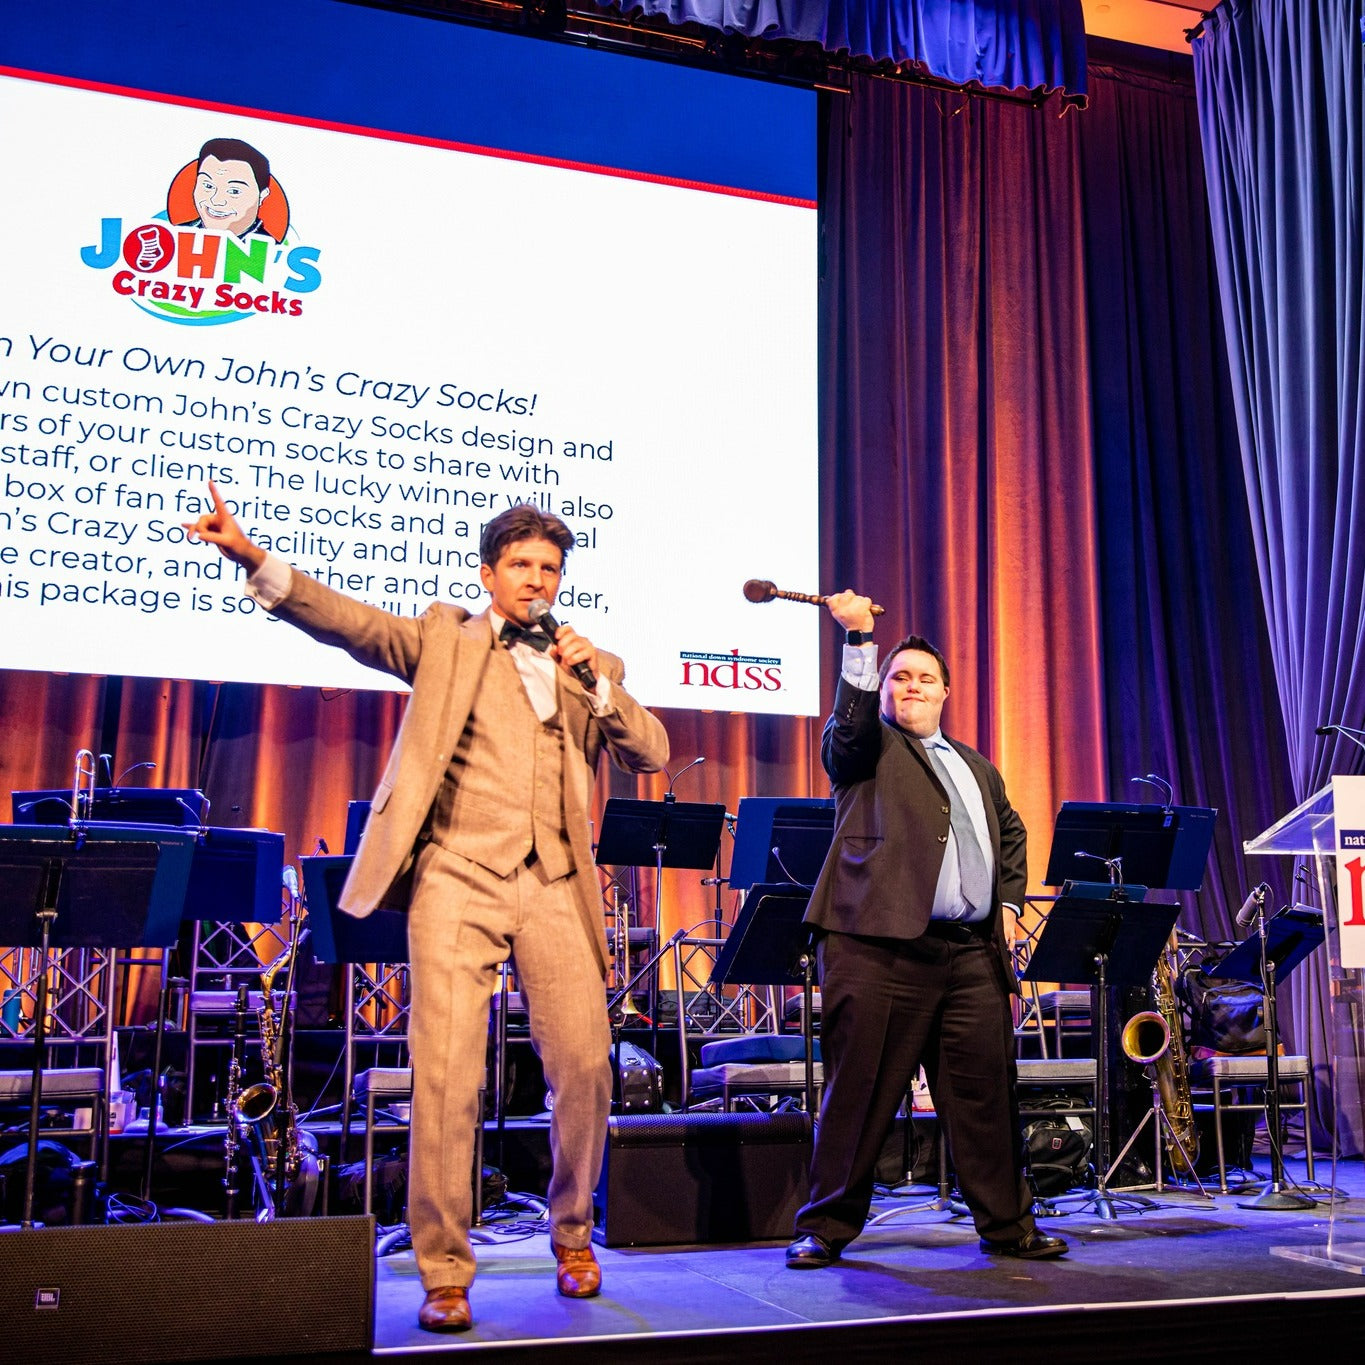 John’s Crazy Socks Celebrates at the National Down Syndrome Society (NDSS) Annual Gala